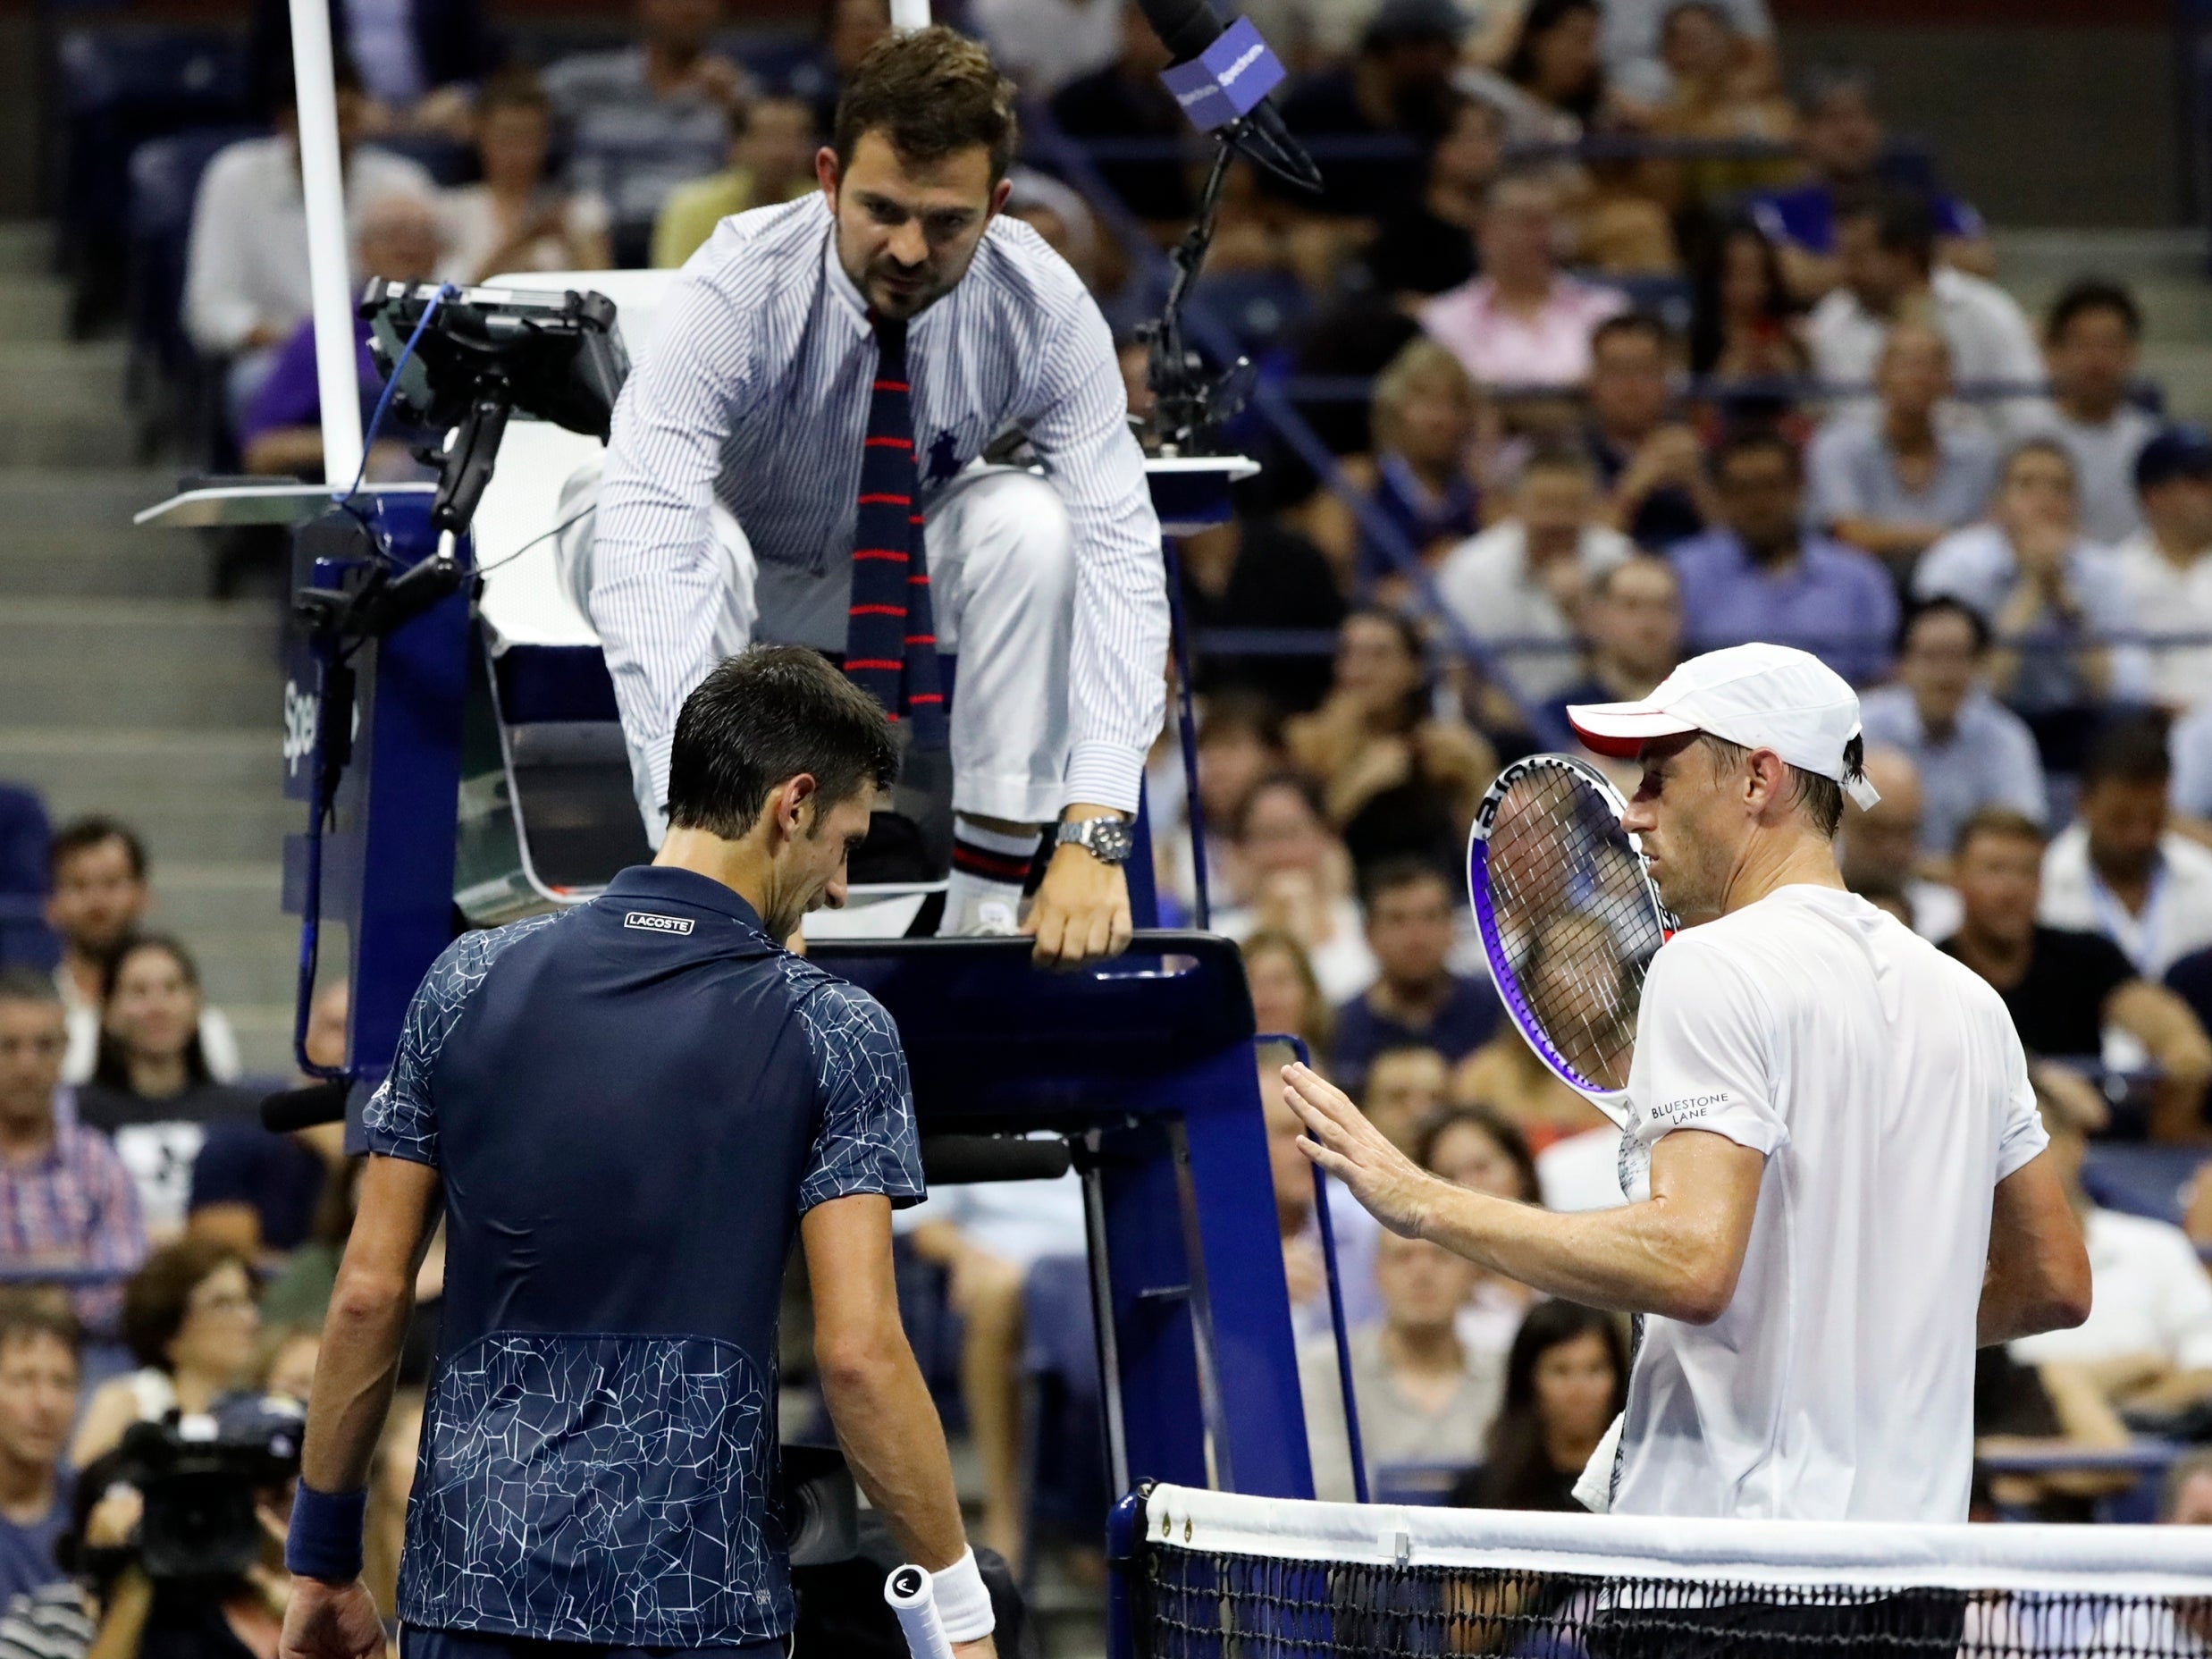 Millman was sent to change his shirt by the chair umpire